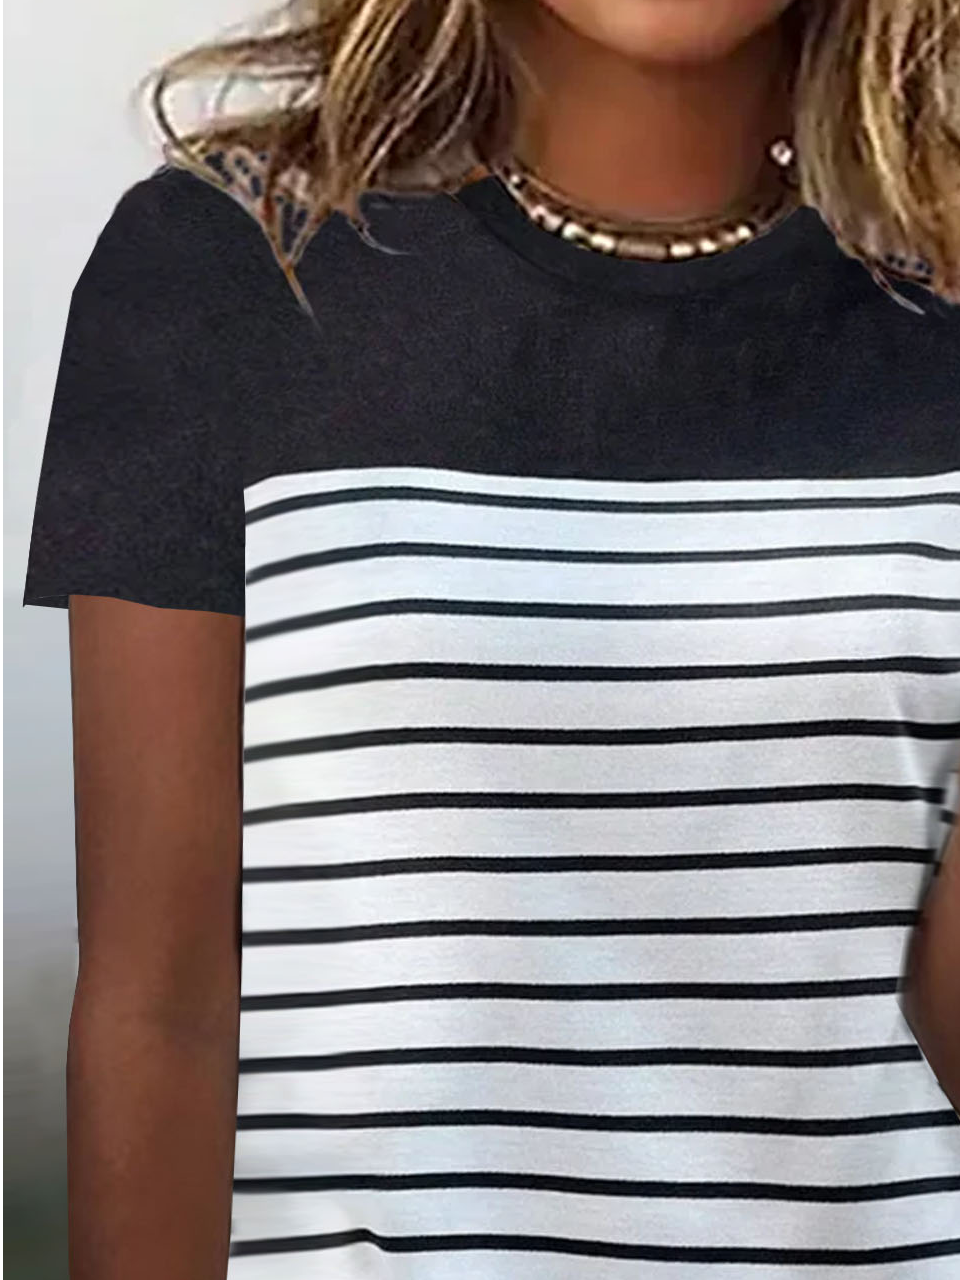 Crew Neck Striped Casual Loose T-Shirt